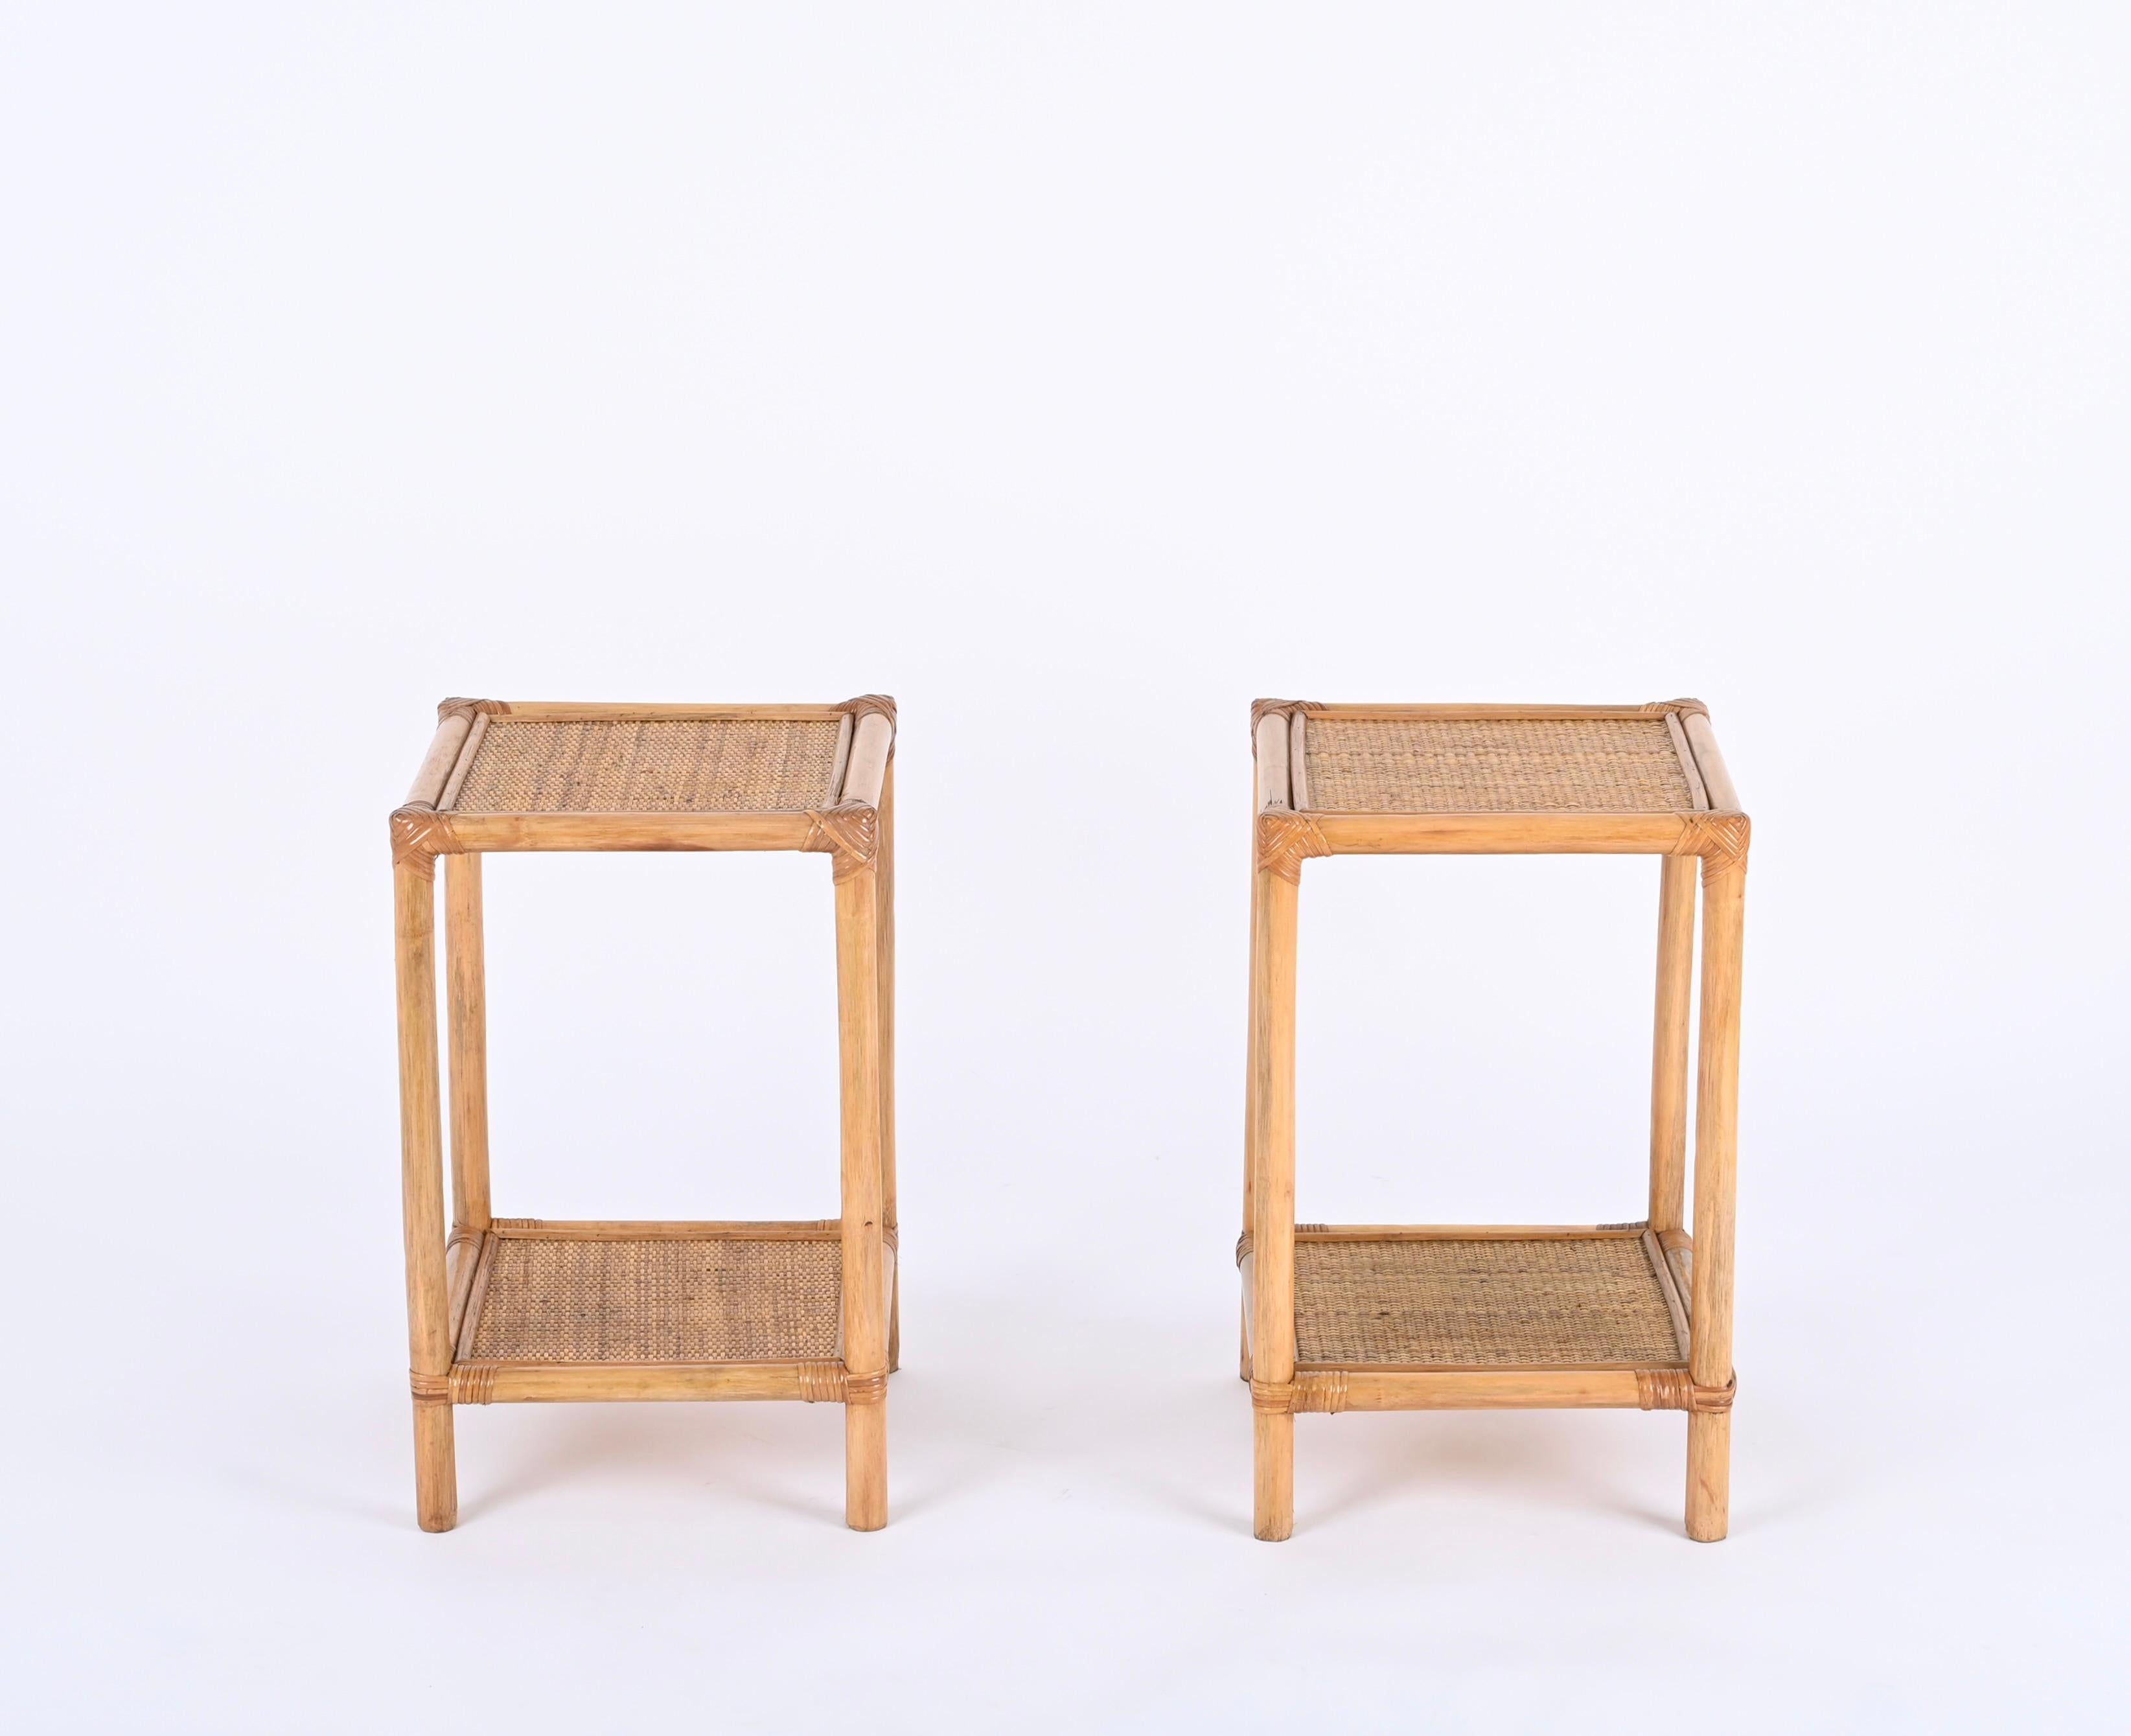 Gorgeous pair of Mid-Century nightstands in bamboo, wicker and woven rattan. These lovely bedside tables were designed in Italy during the 1970s.

These gorgeous square nightstands are fully made in bamboo canes, the two shelves are enriched inside